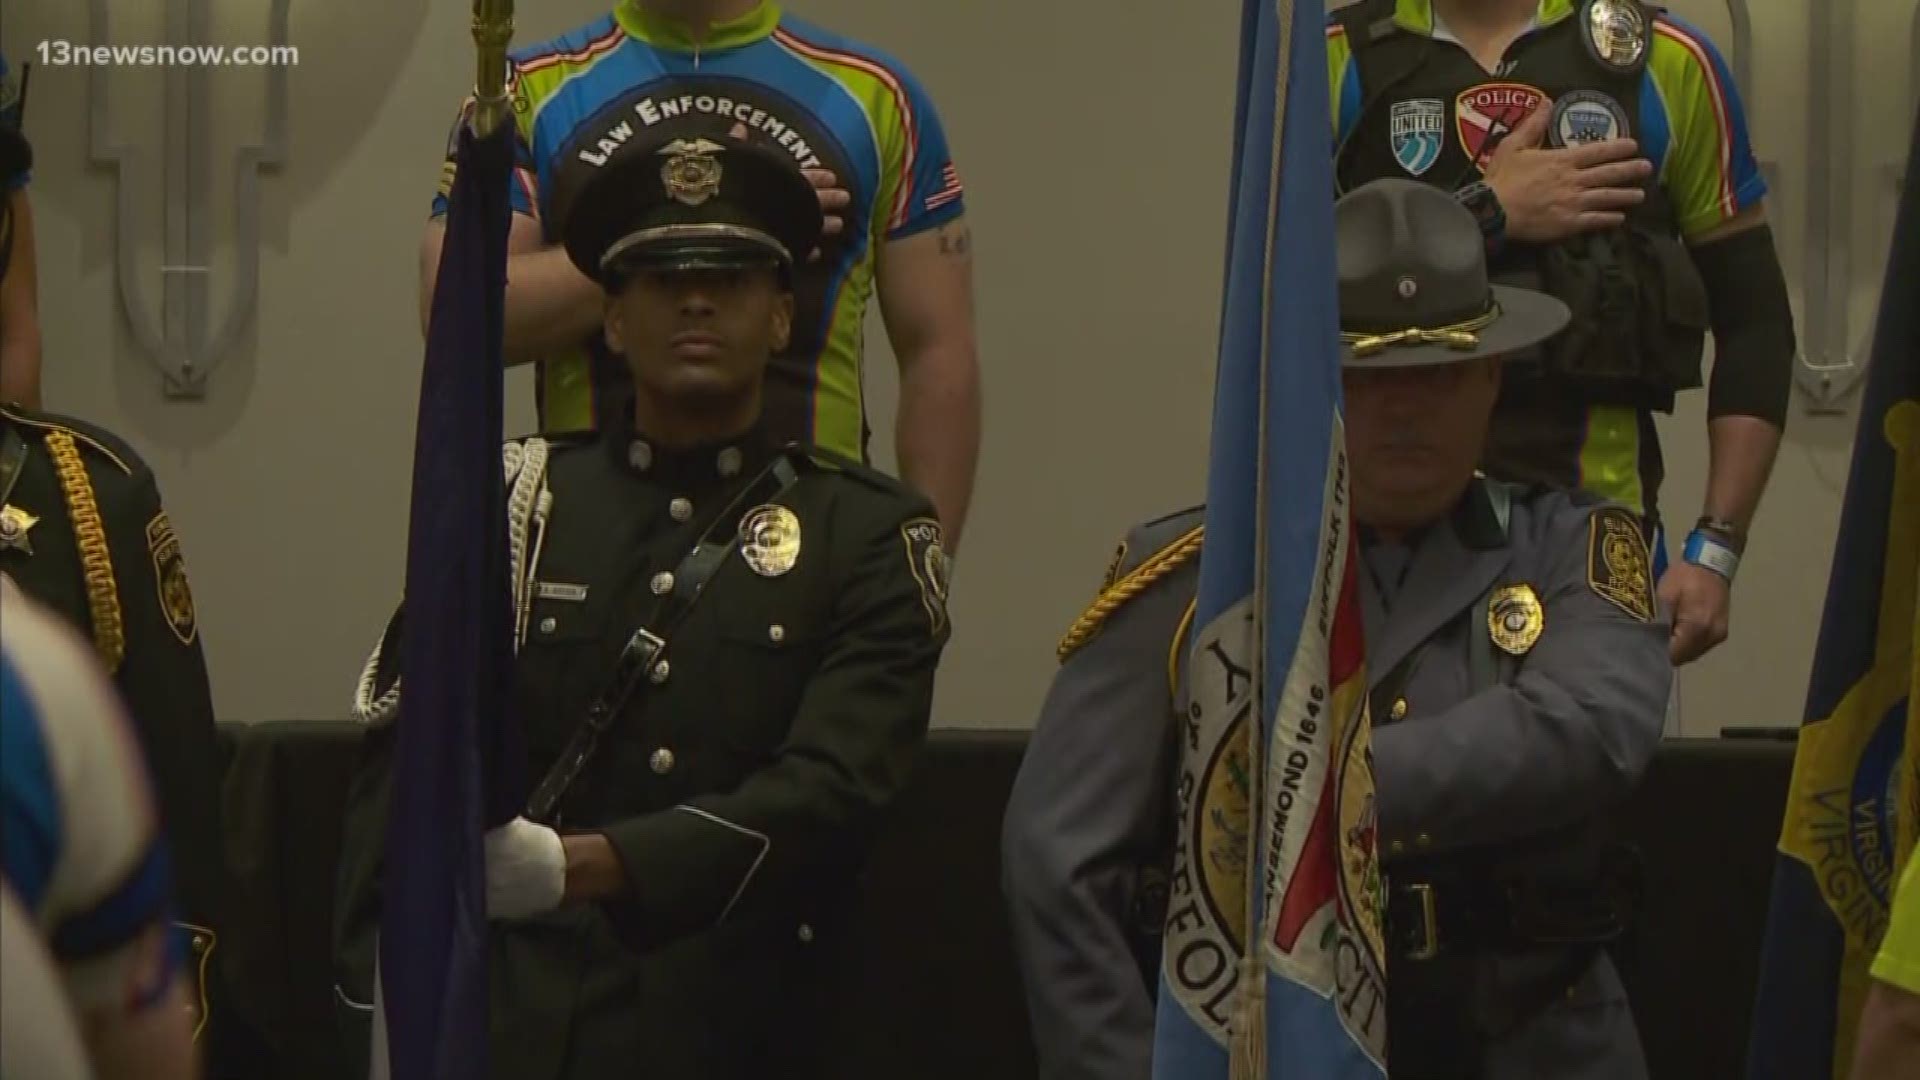 The Road to Hope bike road kicked off with 400 bikers riding to D.C. to remember fallen law enforcement officers.